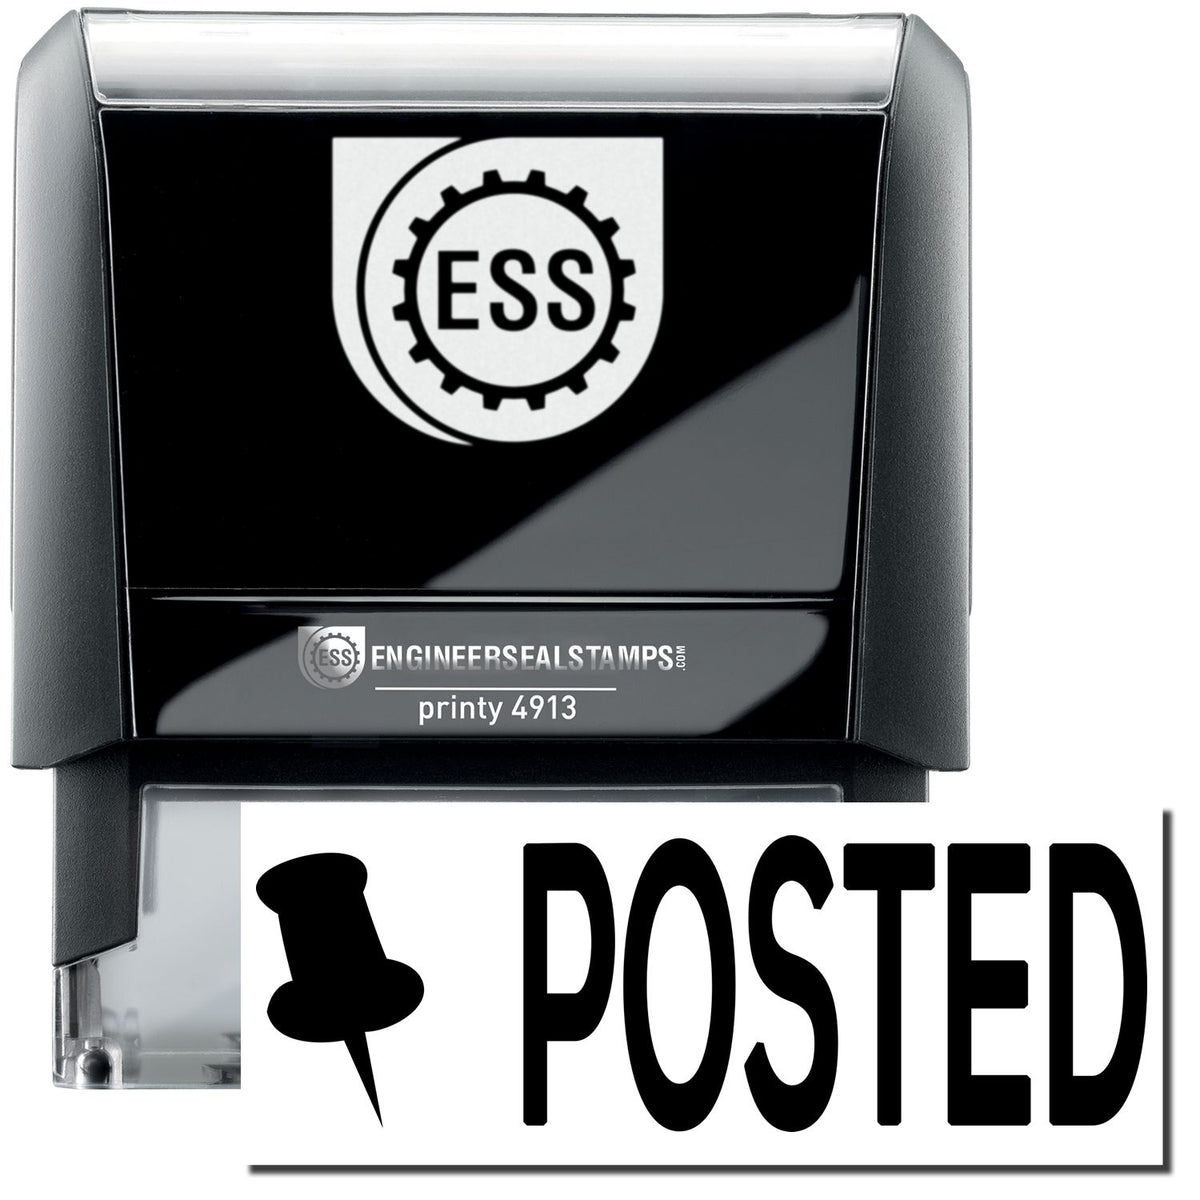 A self-inking stamp with a stamped image showing how the text &quot;POSTED&quot; in a large bold font with a thumbtack image on the left side is displayed after stamping.